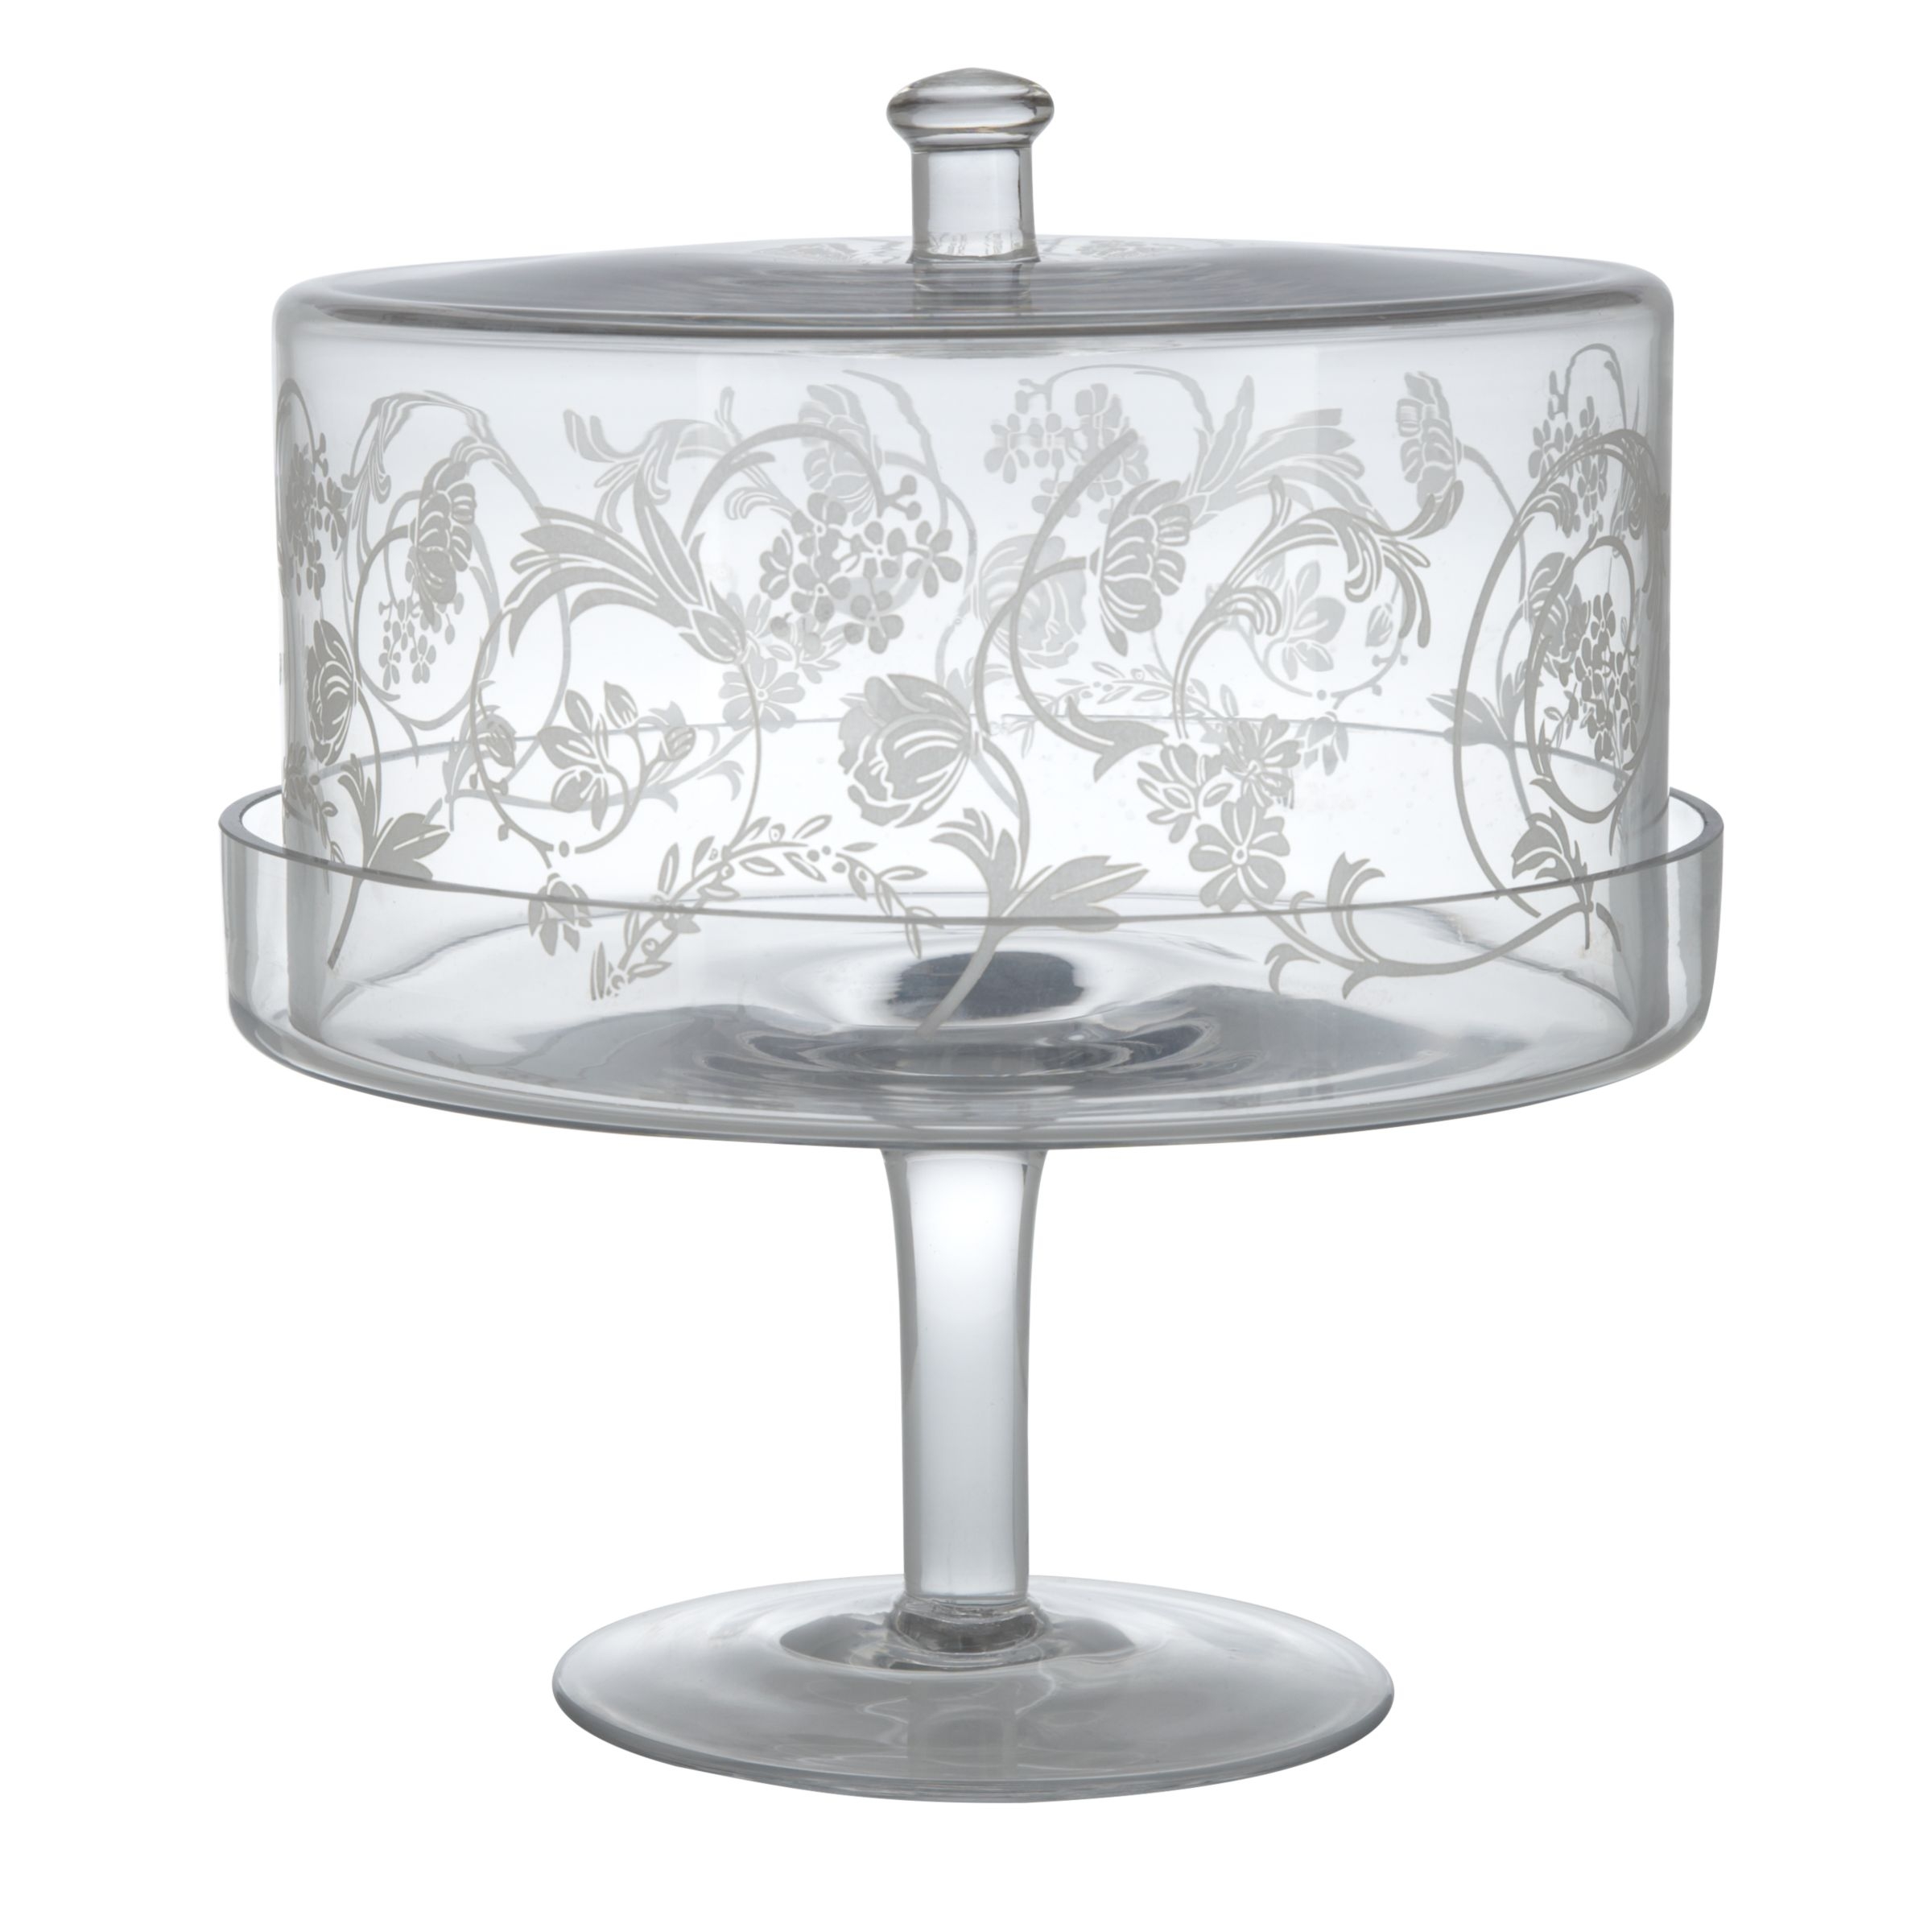 Buy brissi liberty cake stand and dome online at